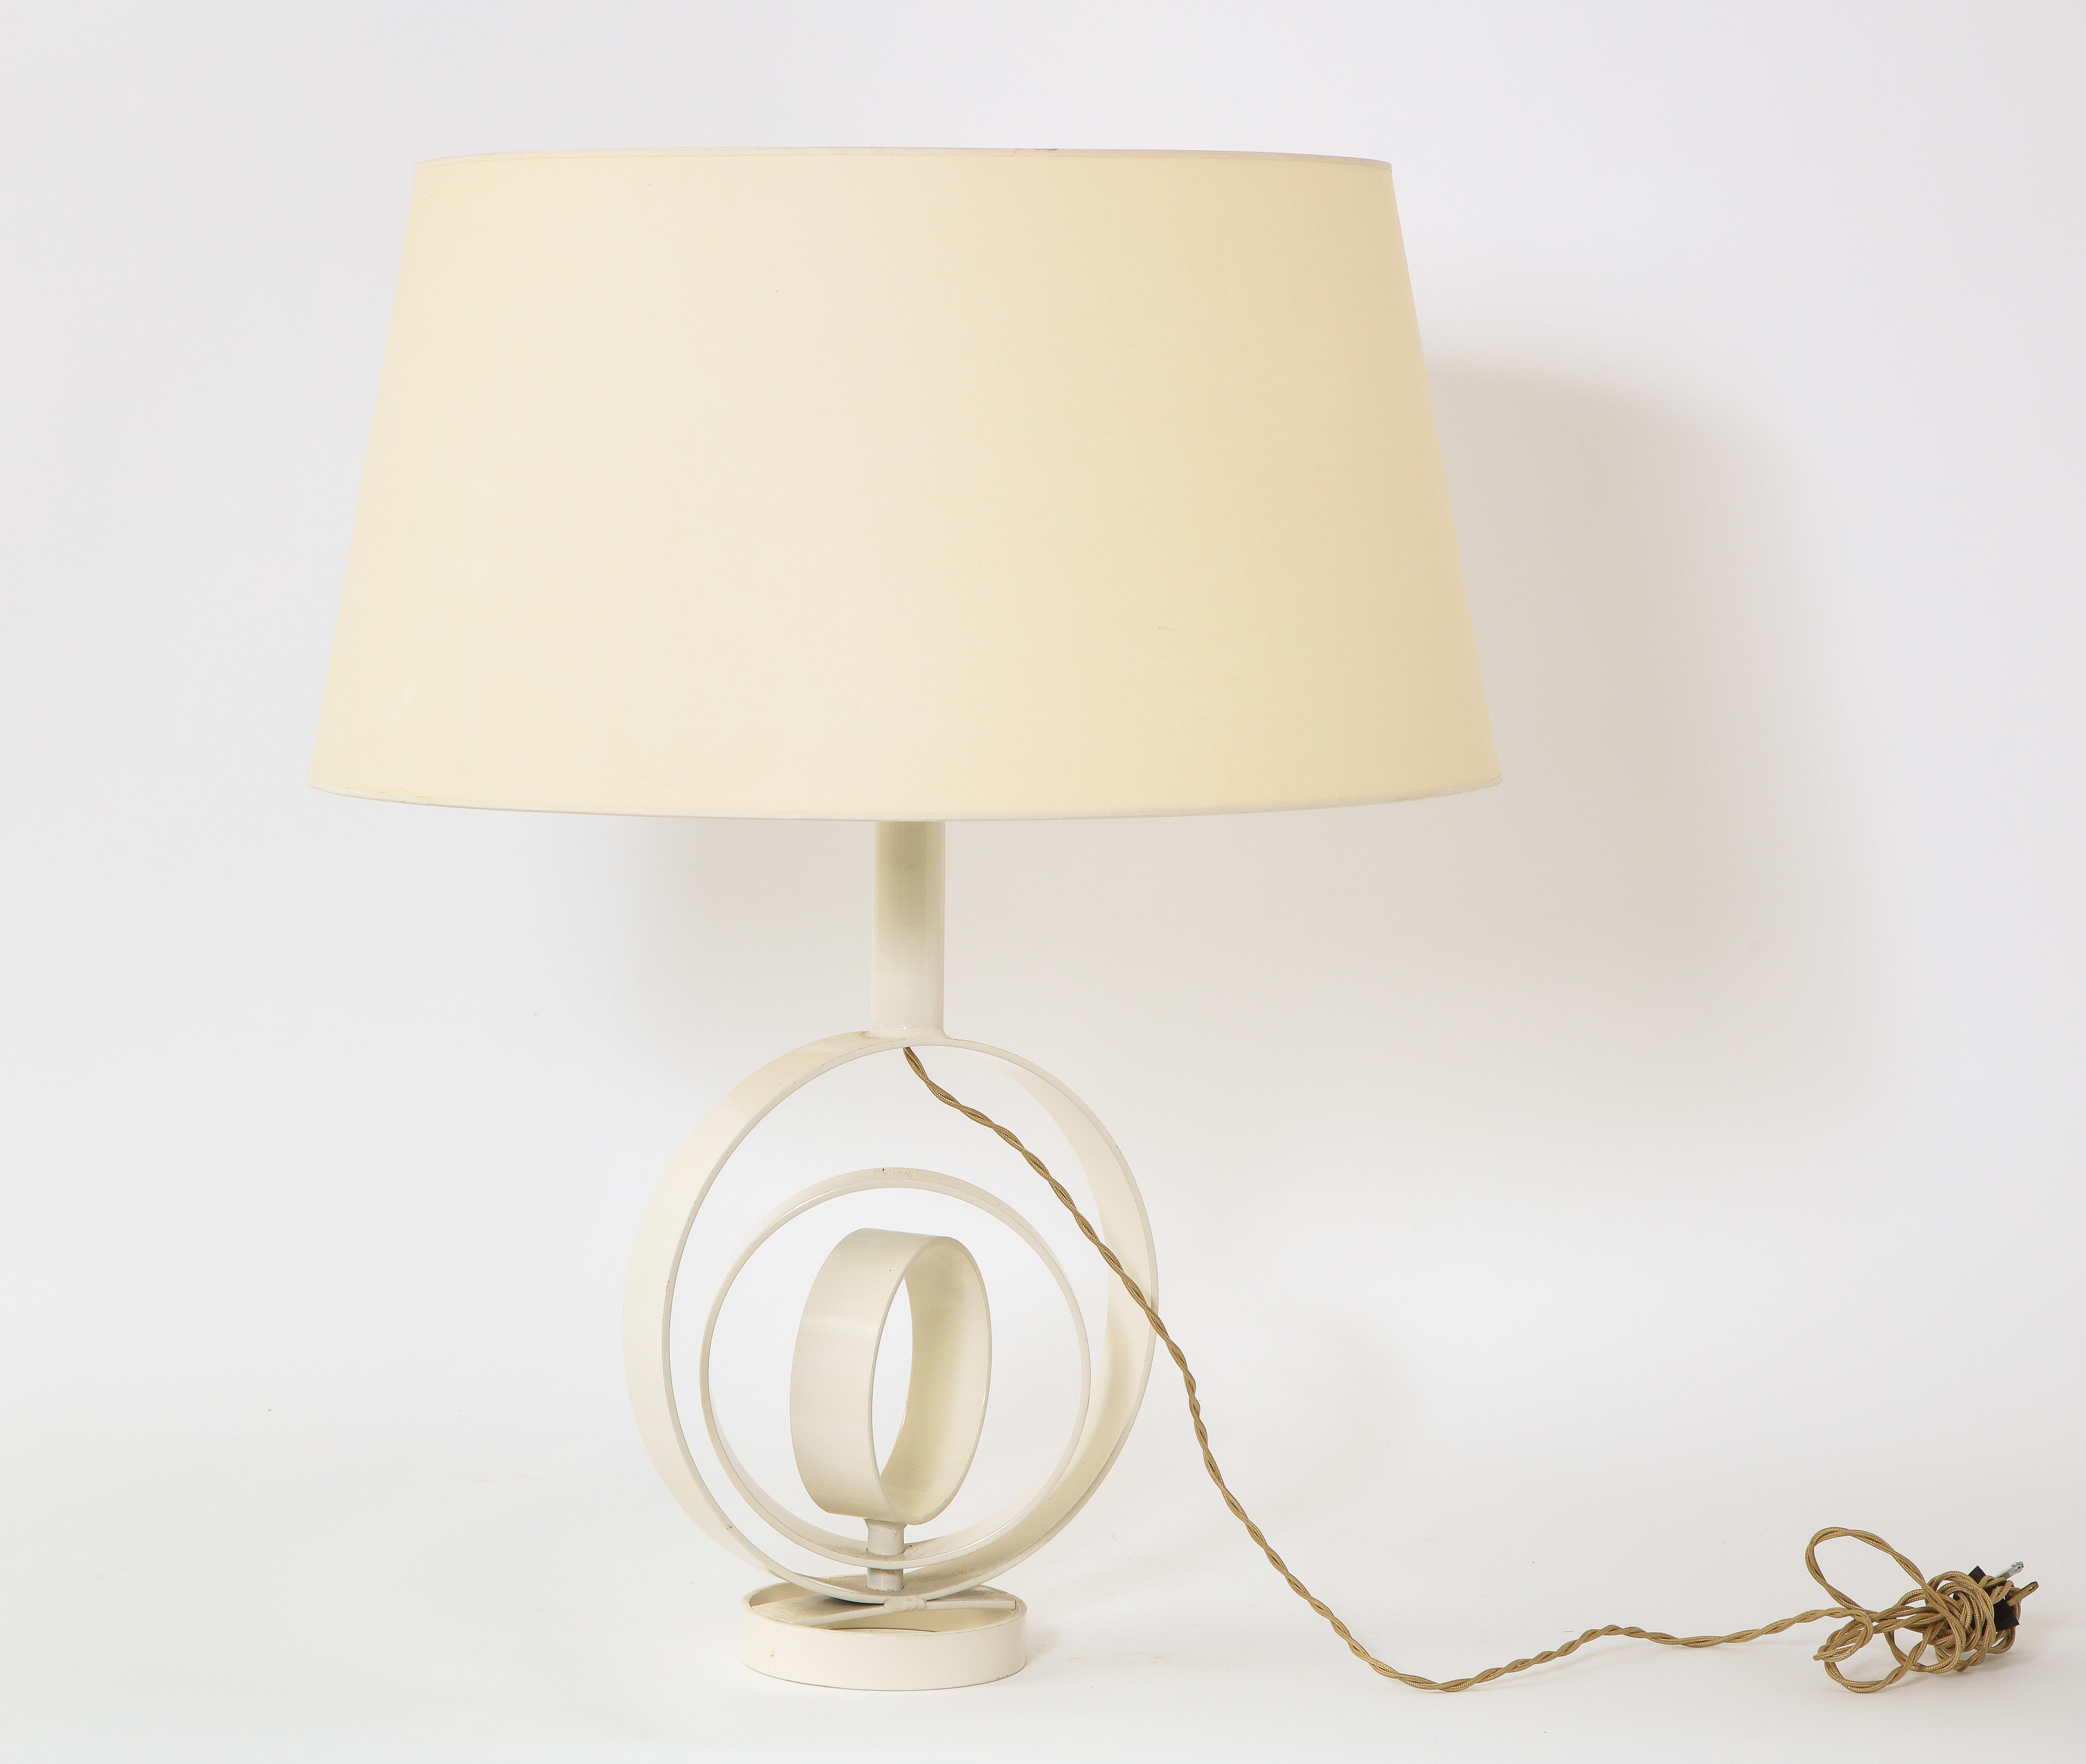 French Concentric Ring Painted Metal Table Lamp, France, 1970s For Sale